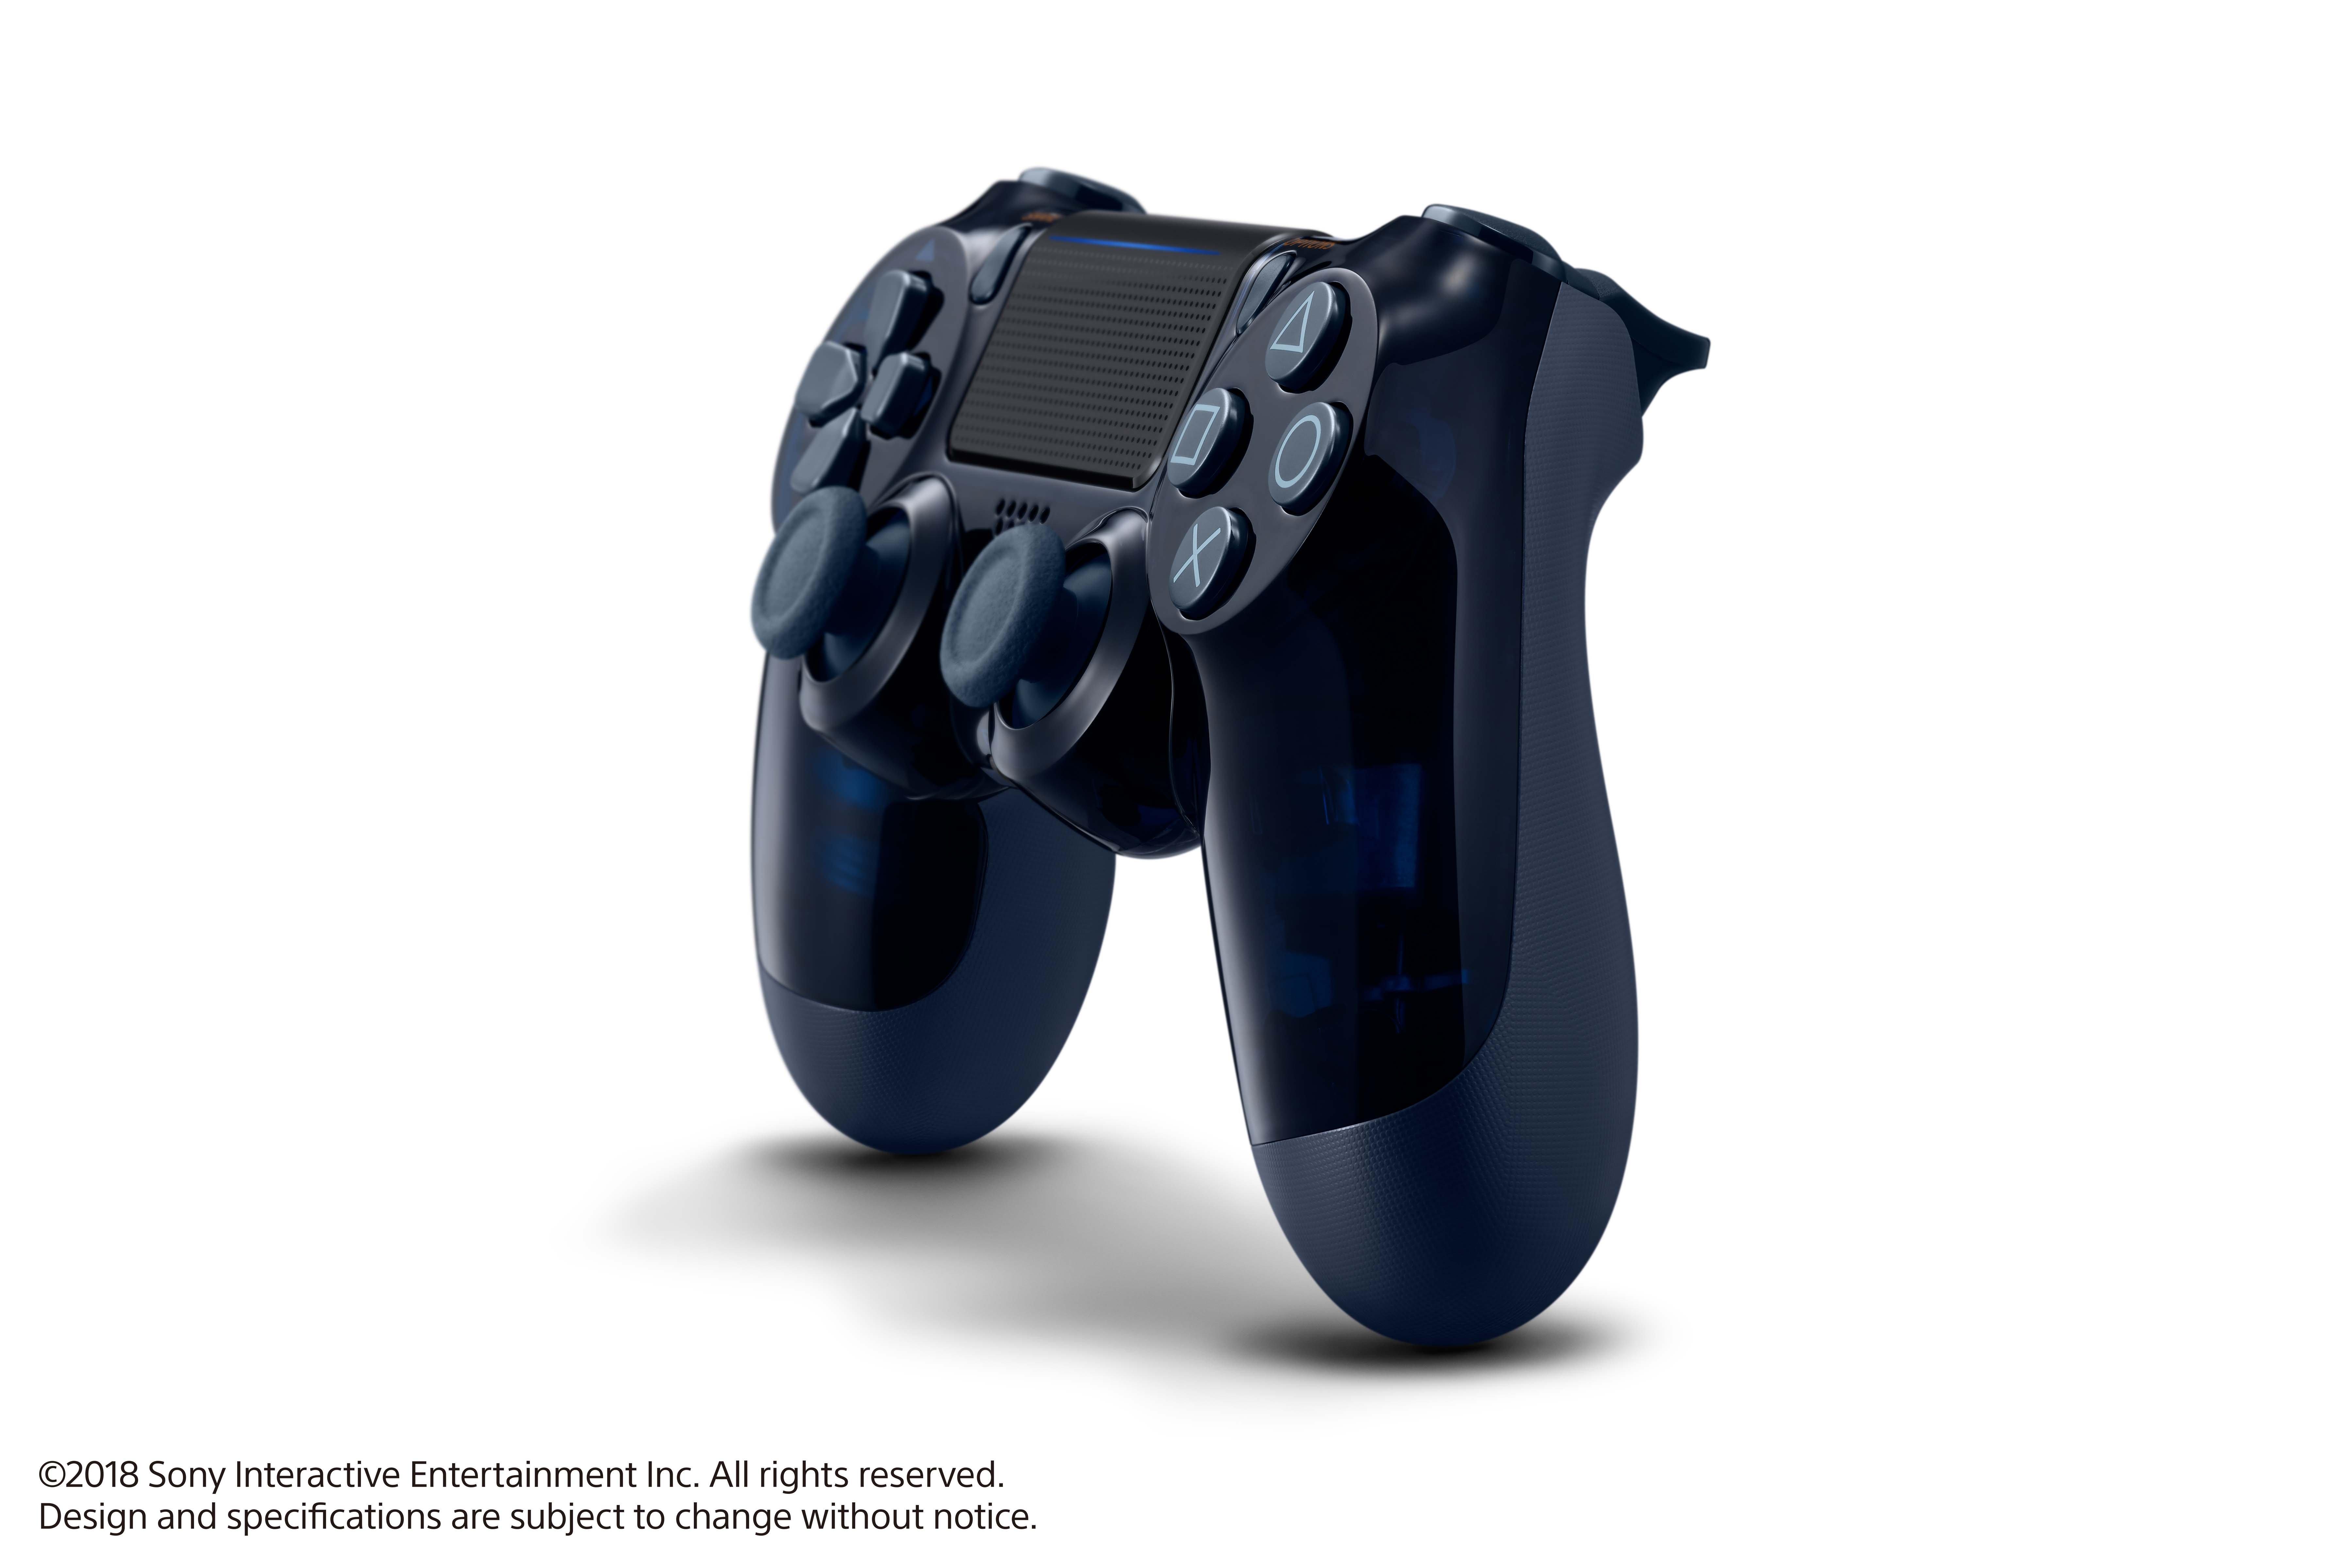 Sony playstation 4 pro controller